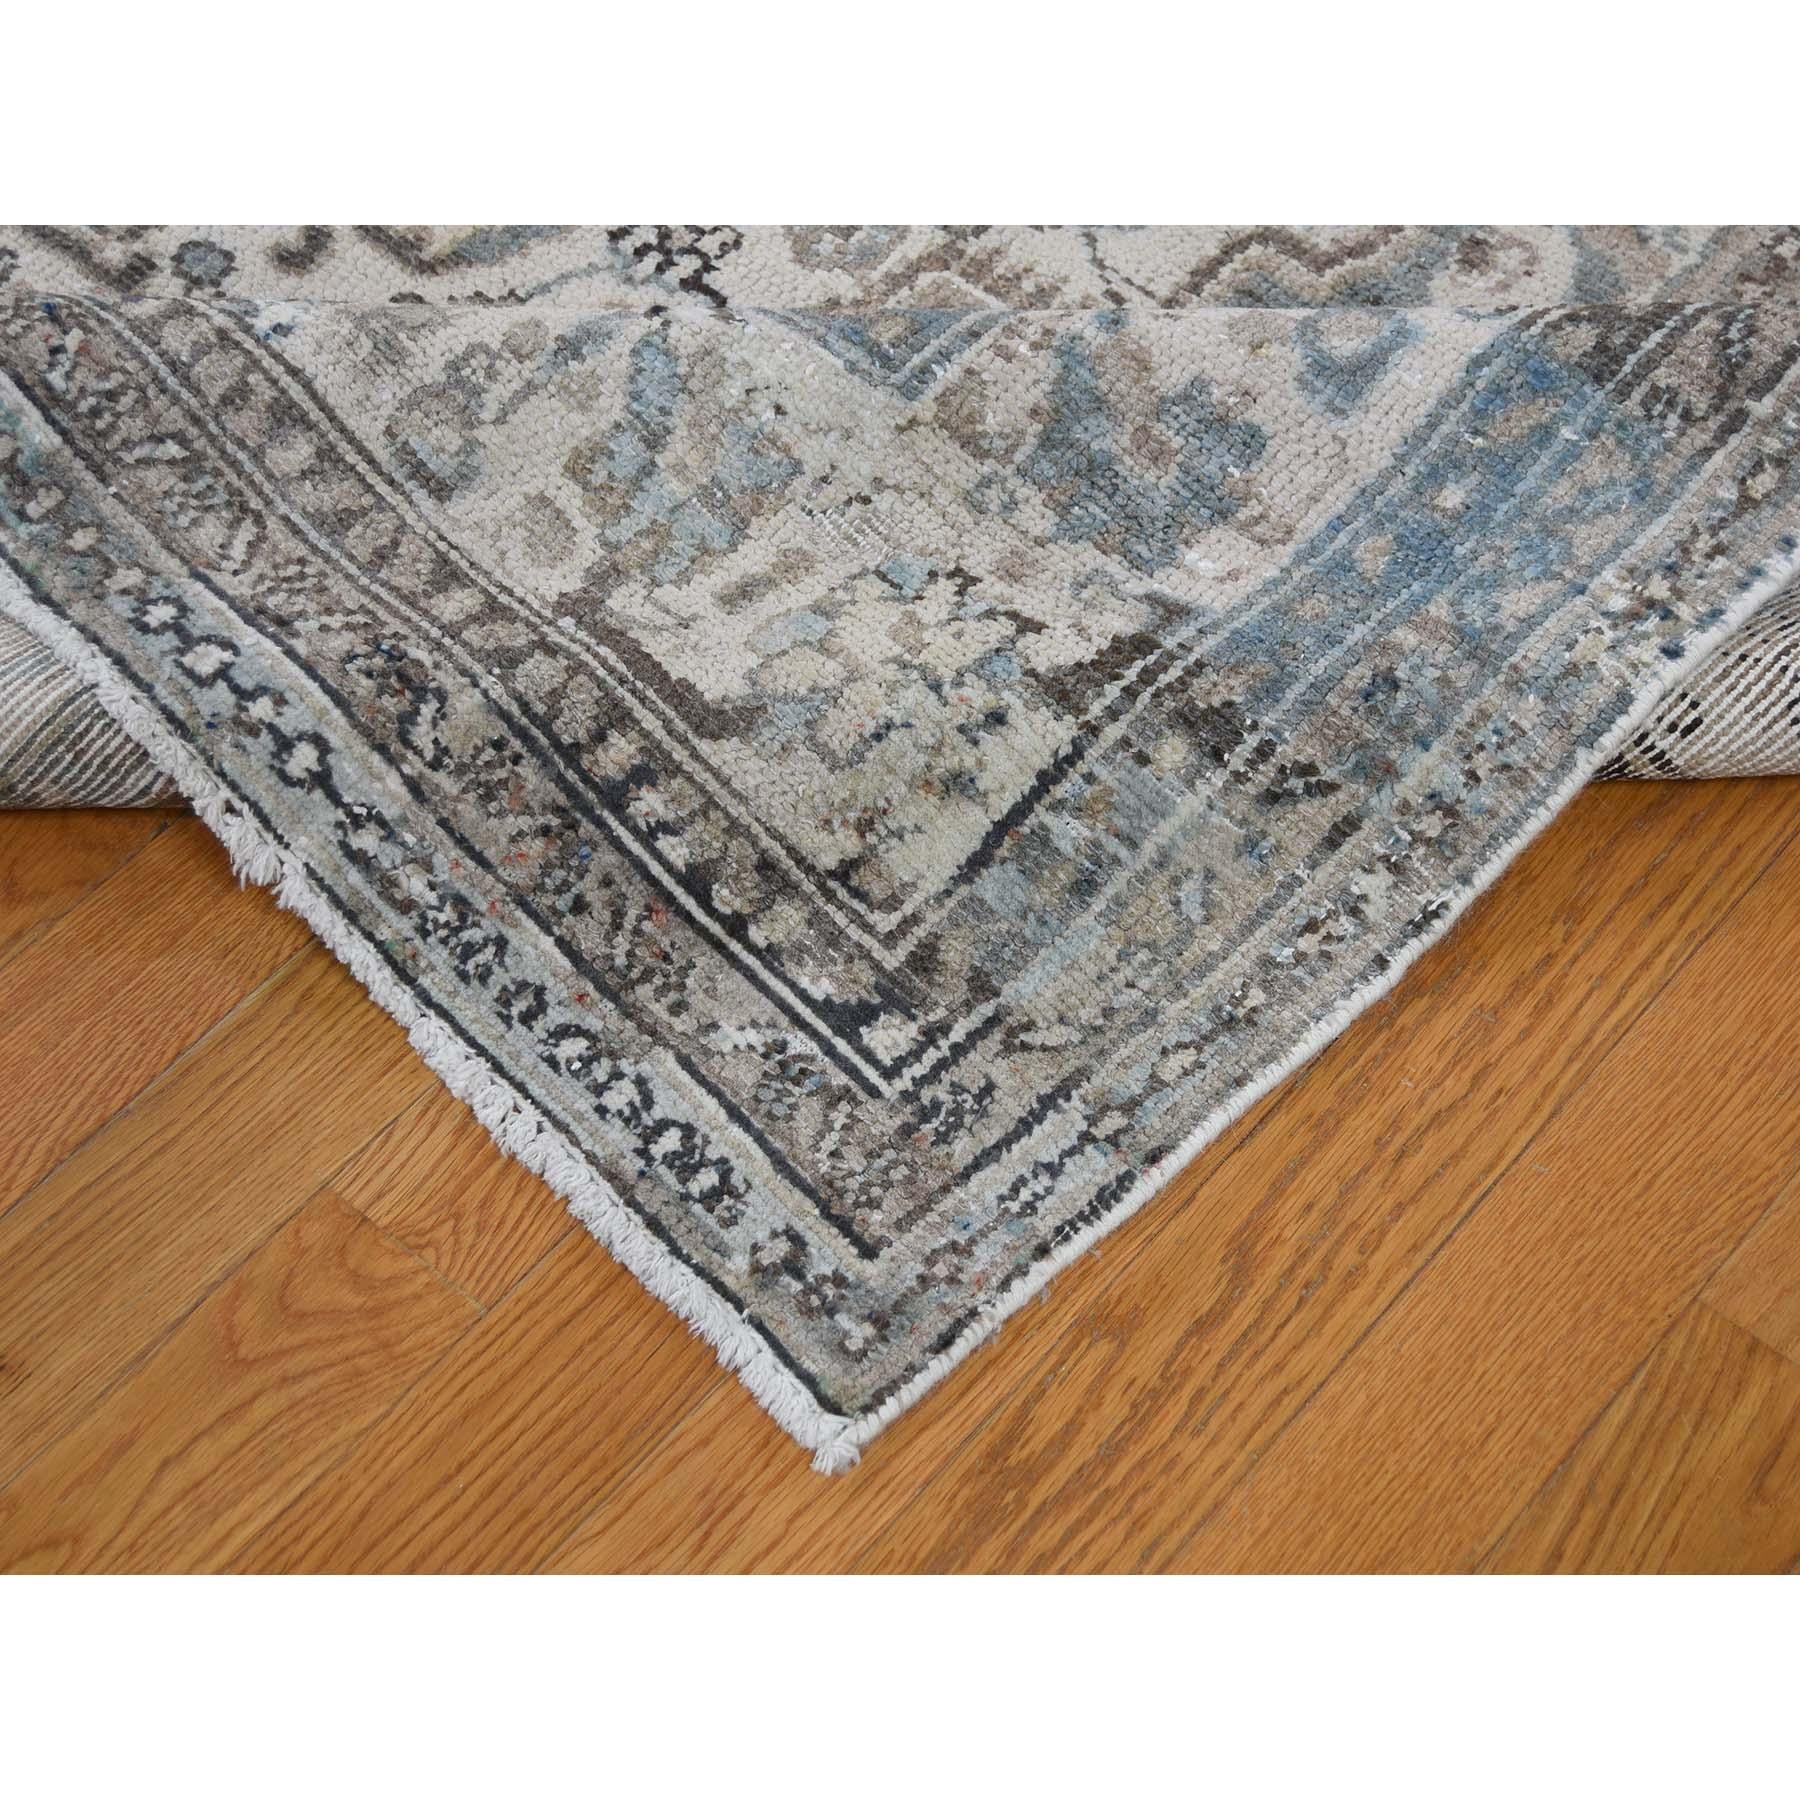 Contemporary Vintage Hamadan with Grey and Blue Hand Knotted Oriental Rug